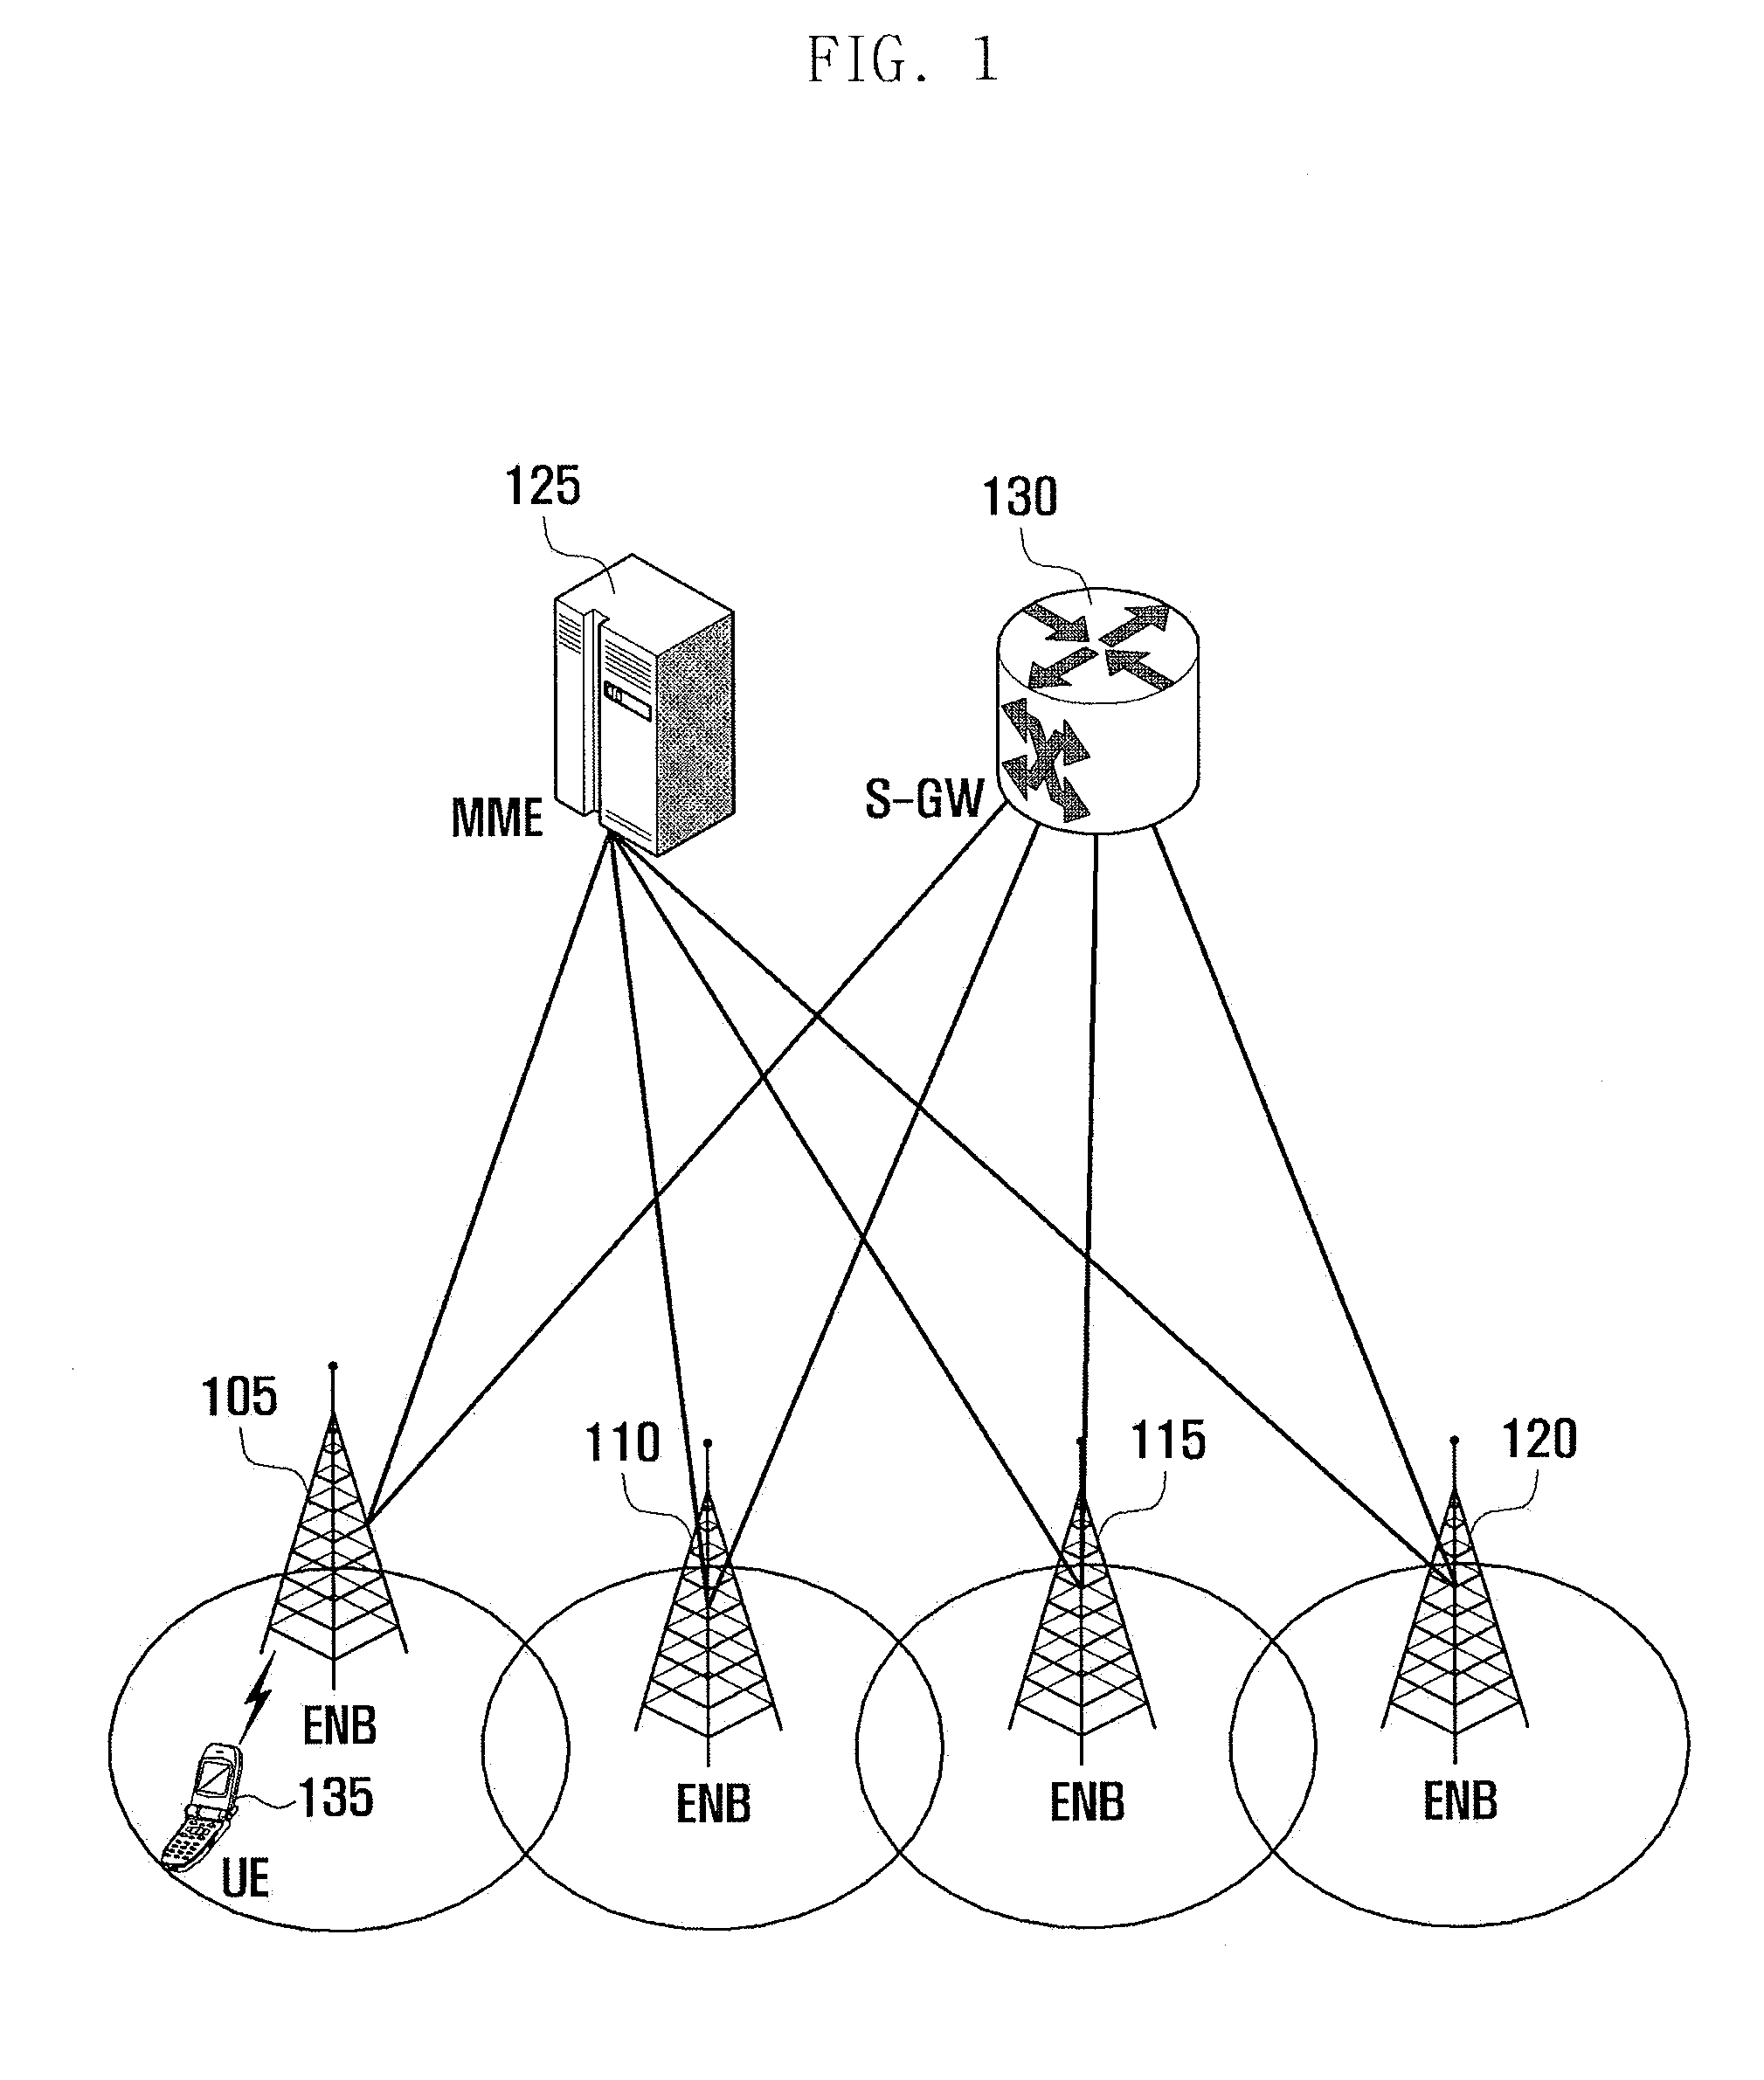 Method and apparatus for performing contention-based access in a mobile communication system